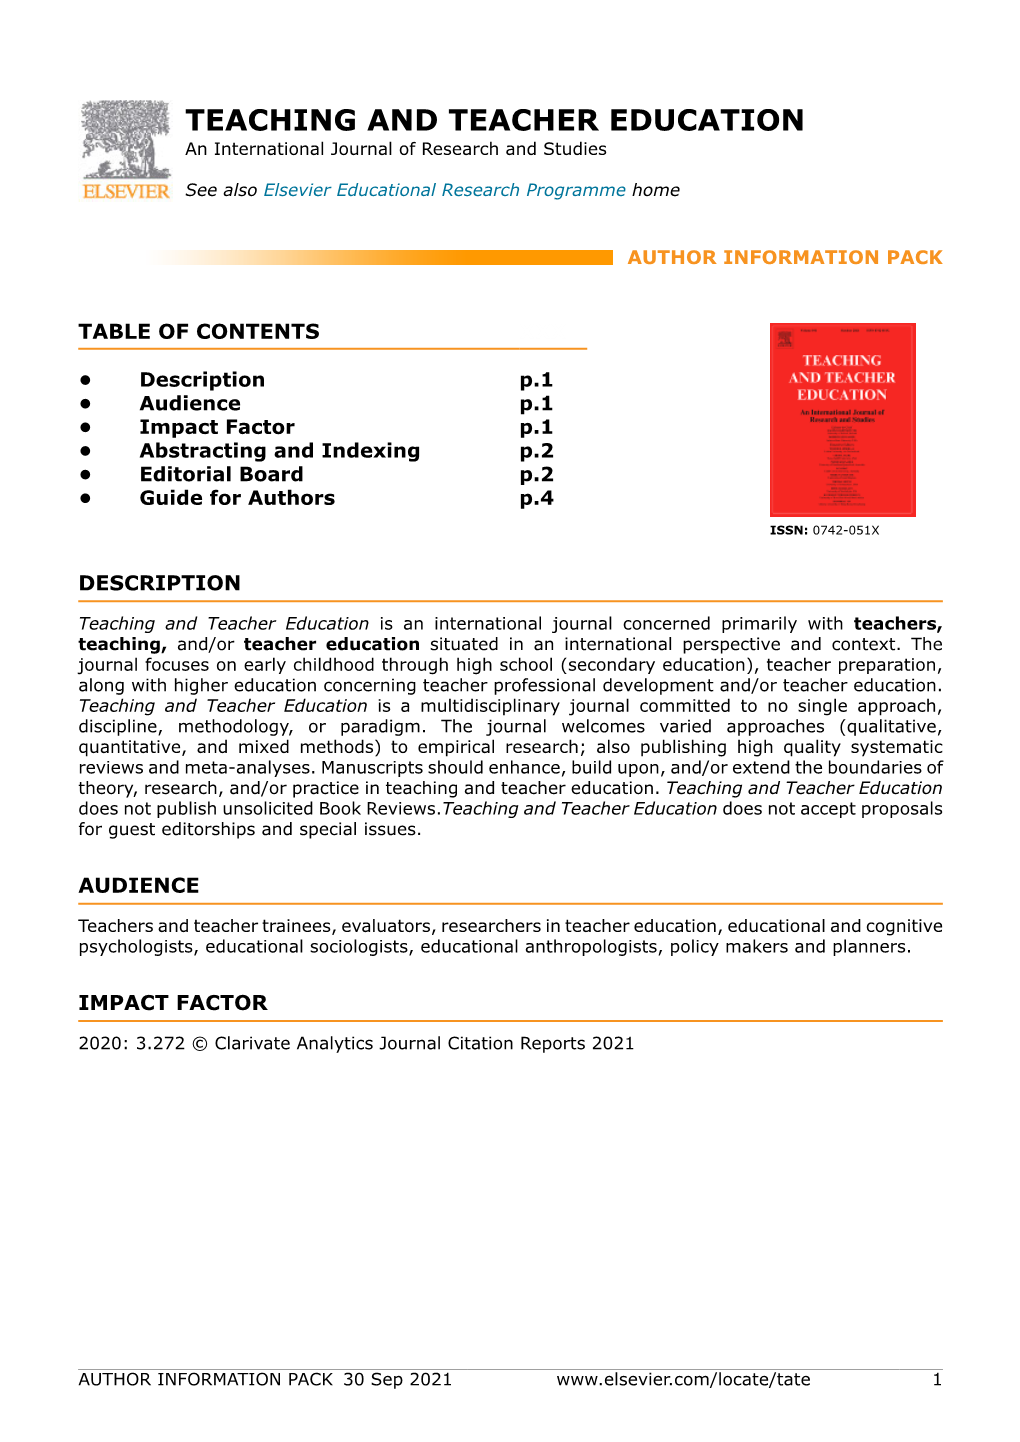 TEACHING and TEACHER EDUCATION an International Journal of Research and Studies